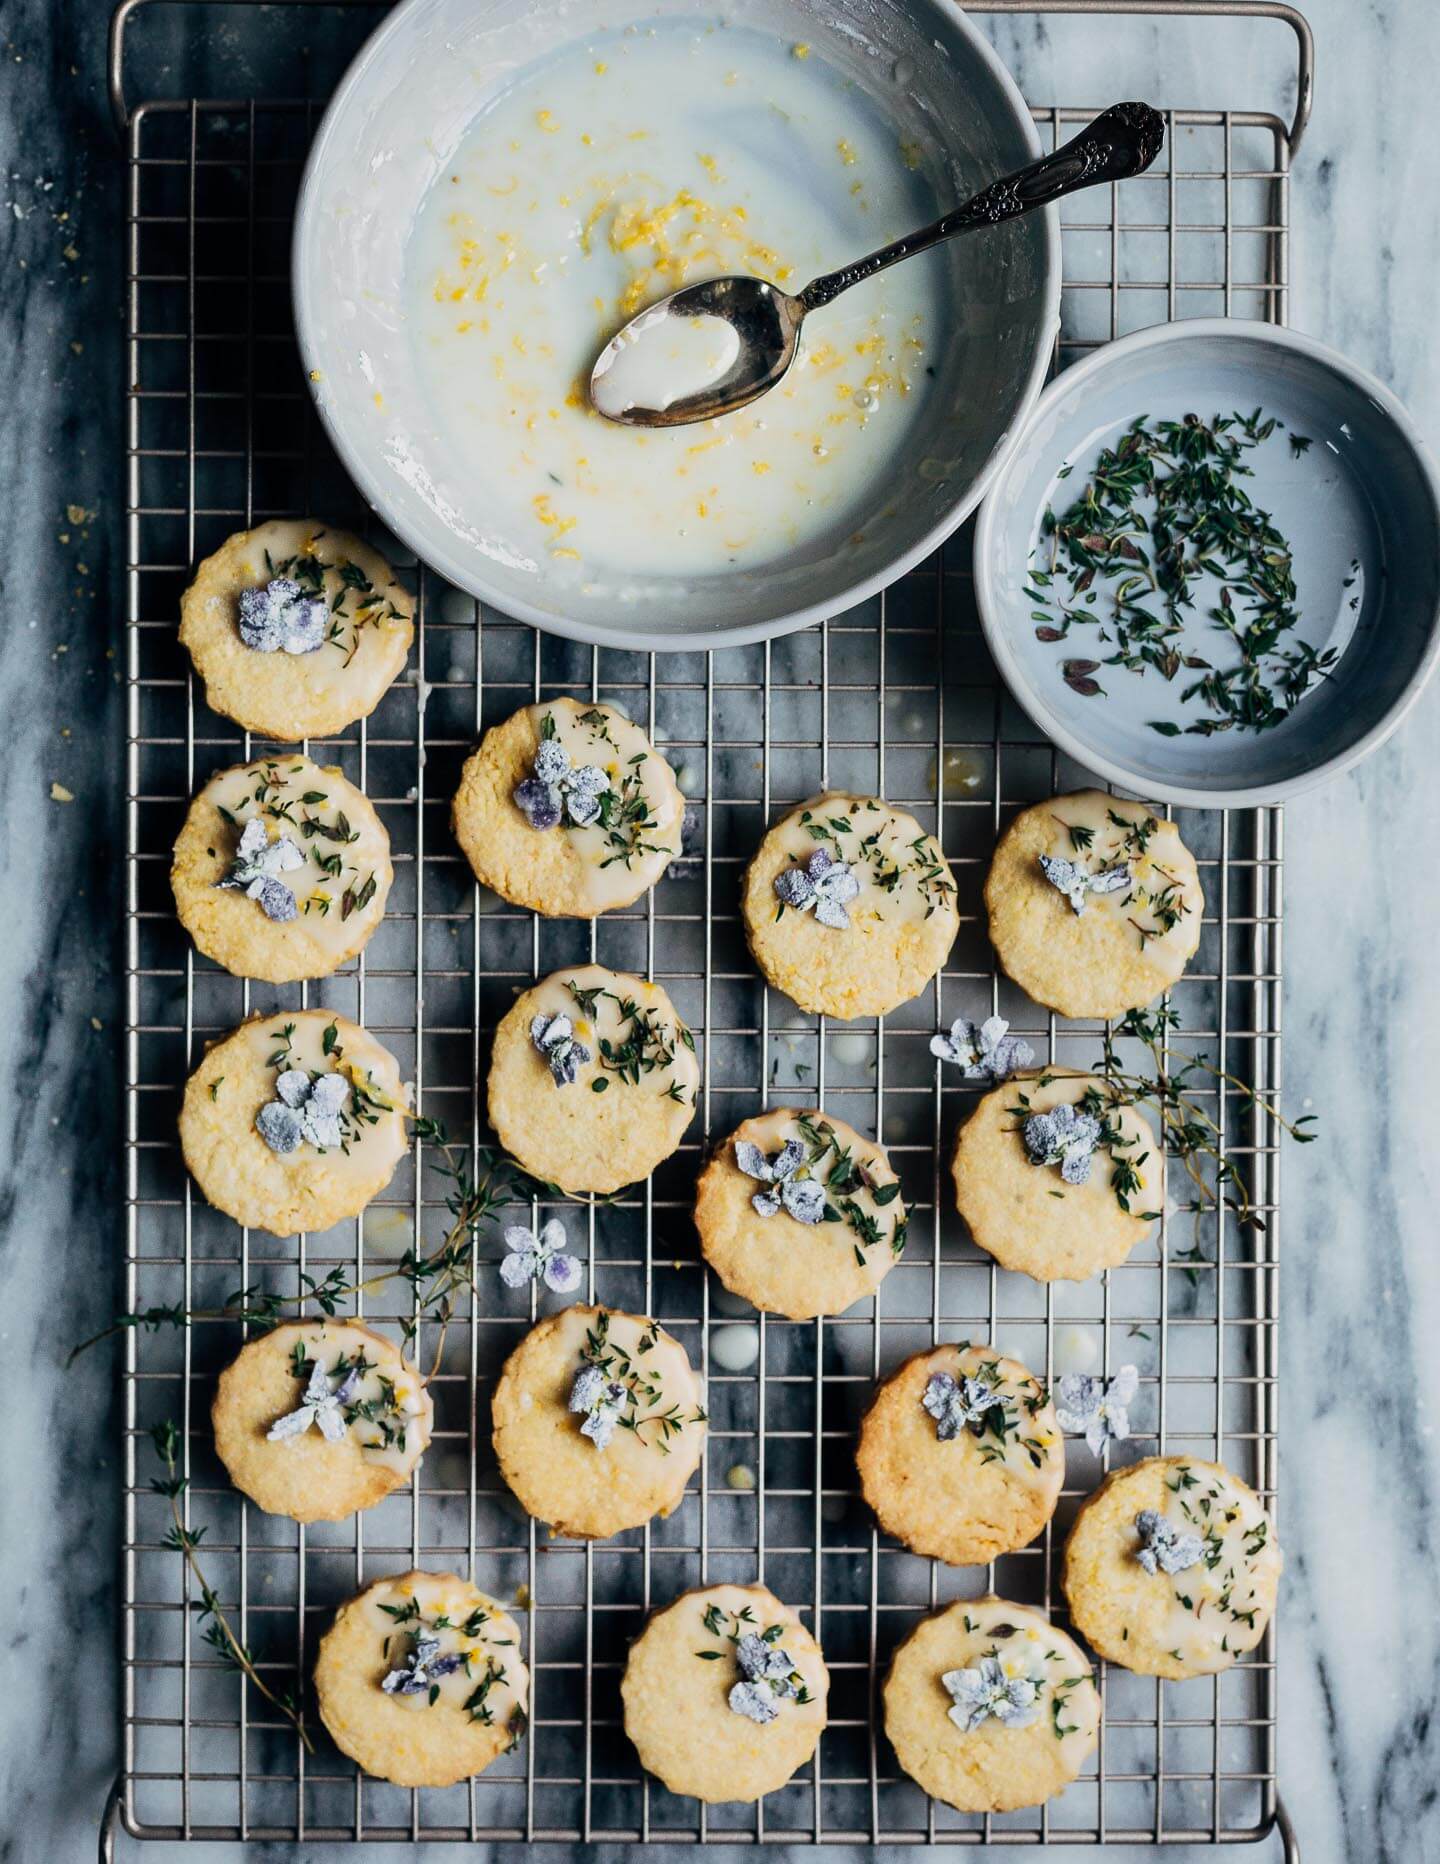 These buttery polenta cookies with a lemony cookie icing, fresh thyme leaves, and candied violets capture the flavors of early spring beautifully.